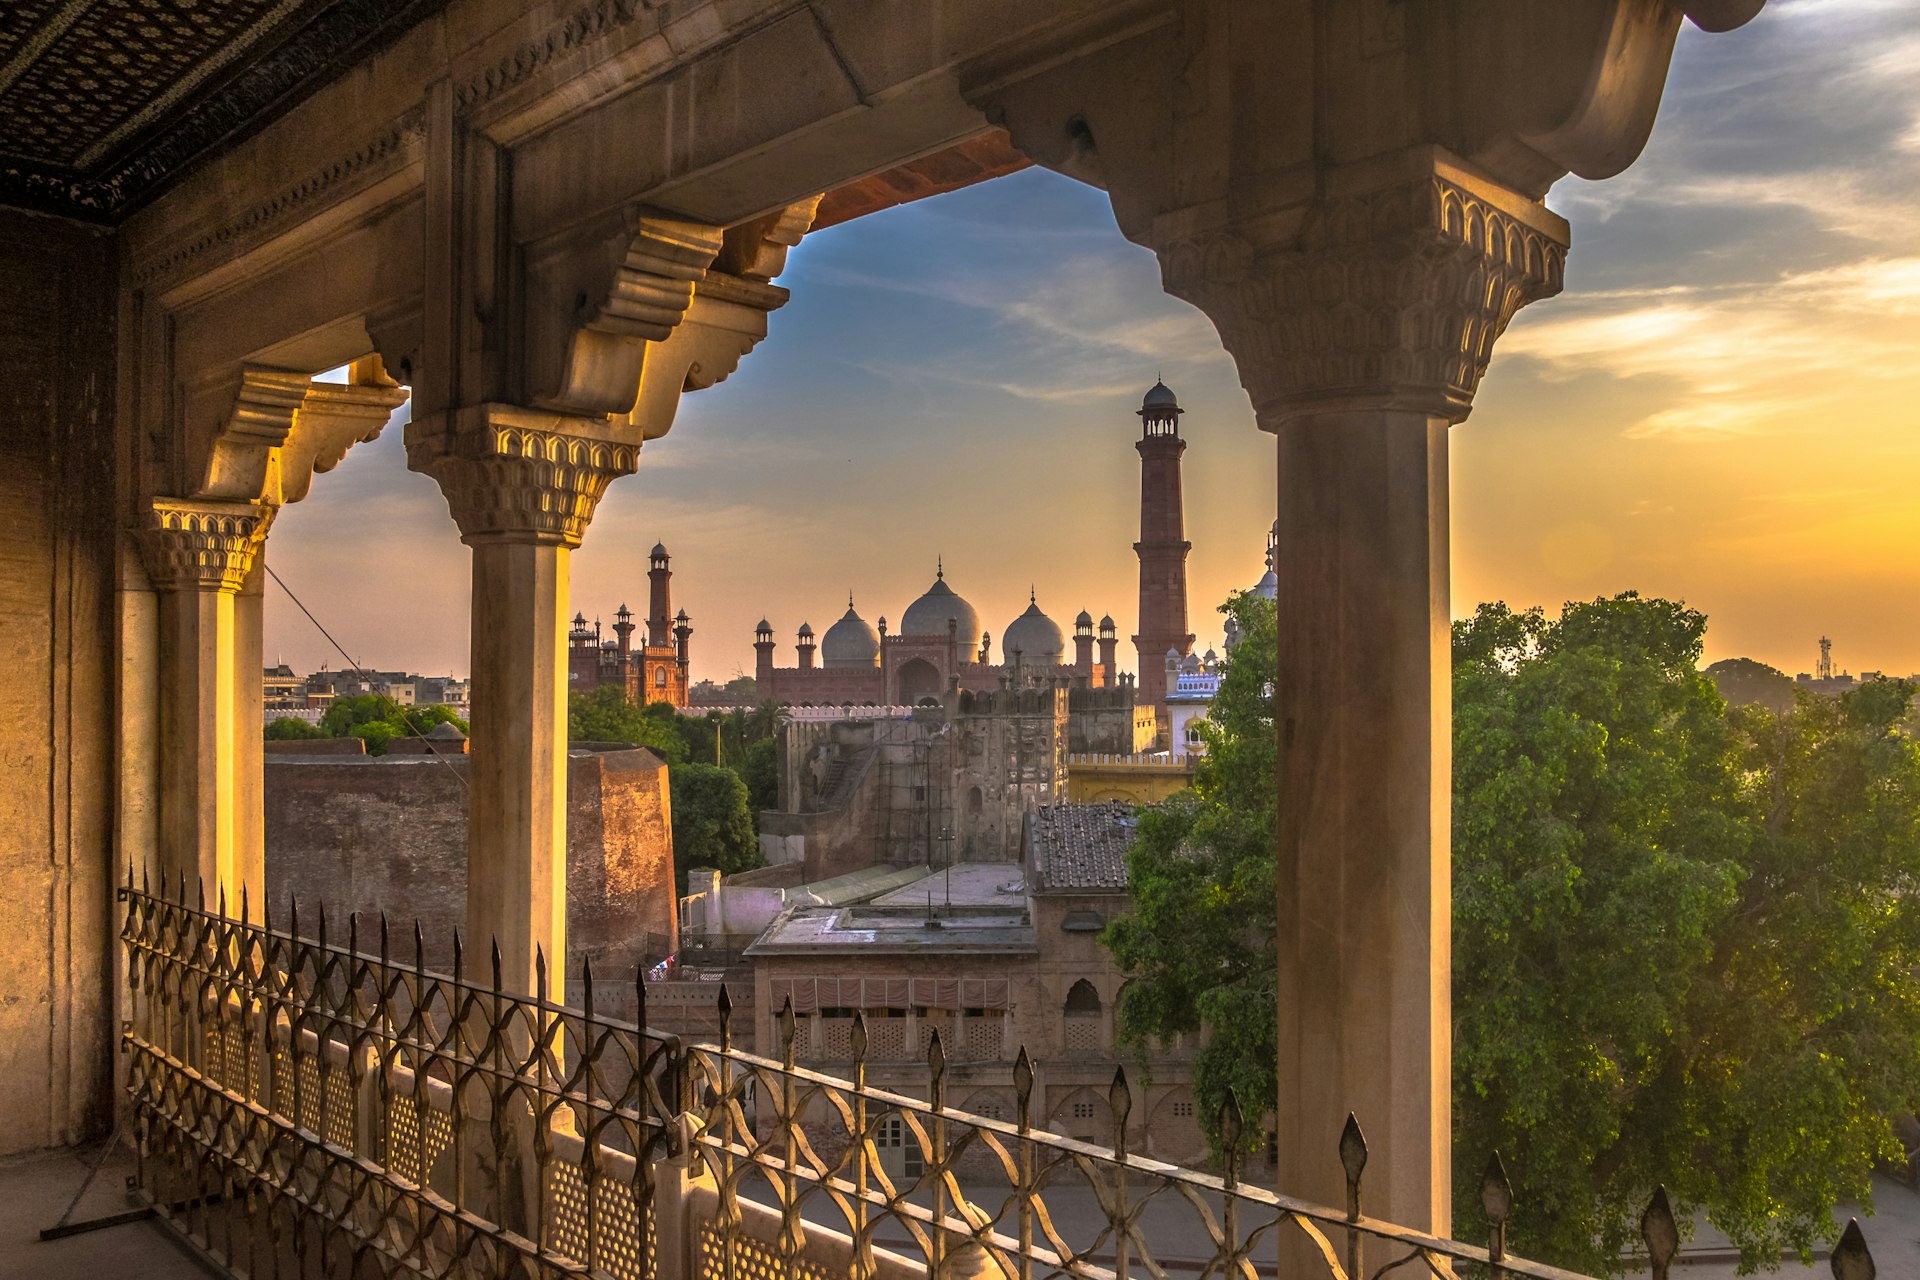 Lahore Grand Mosque from the balcony of Lahore Fort at sunset in Pakistan.